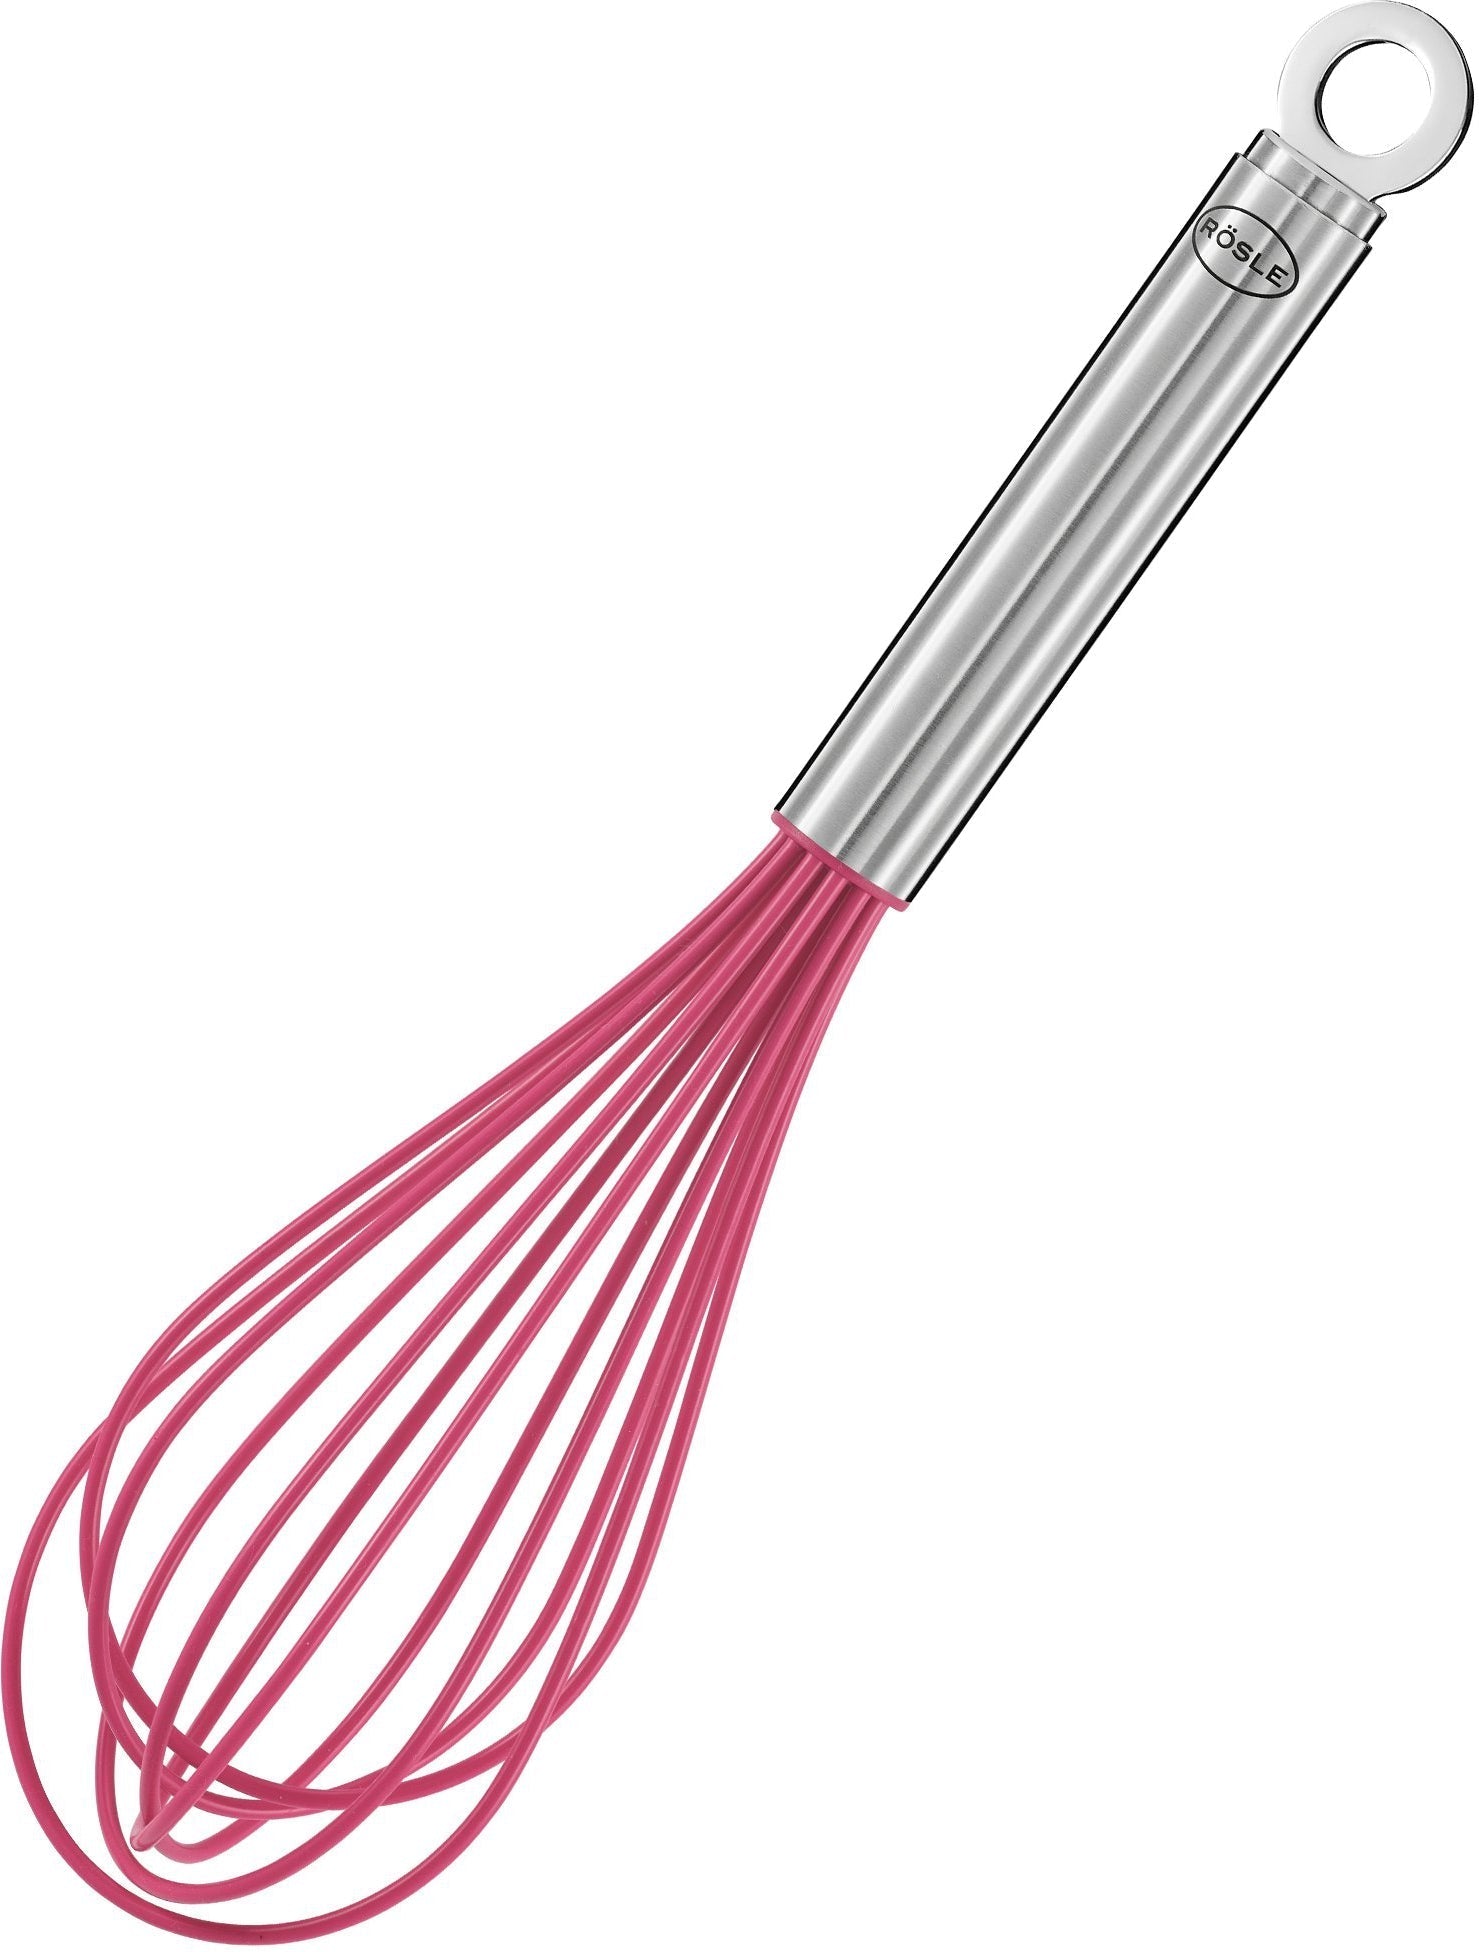 Rosle - 10.6" Silicone Whisk Pink (27 cm) - 13586